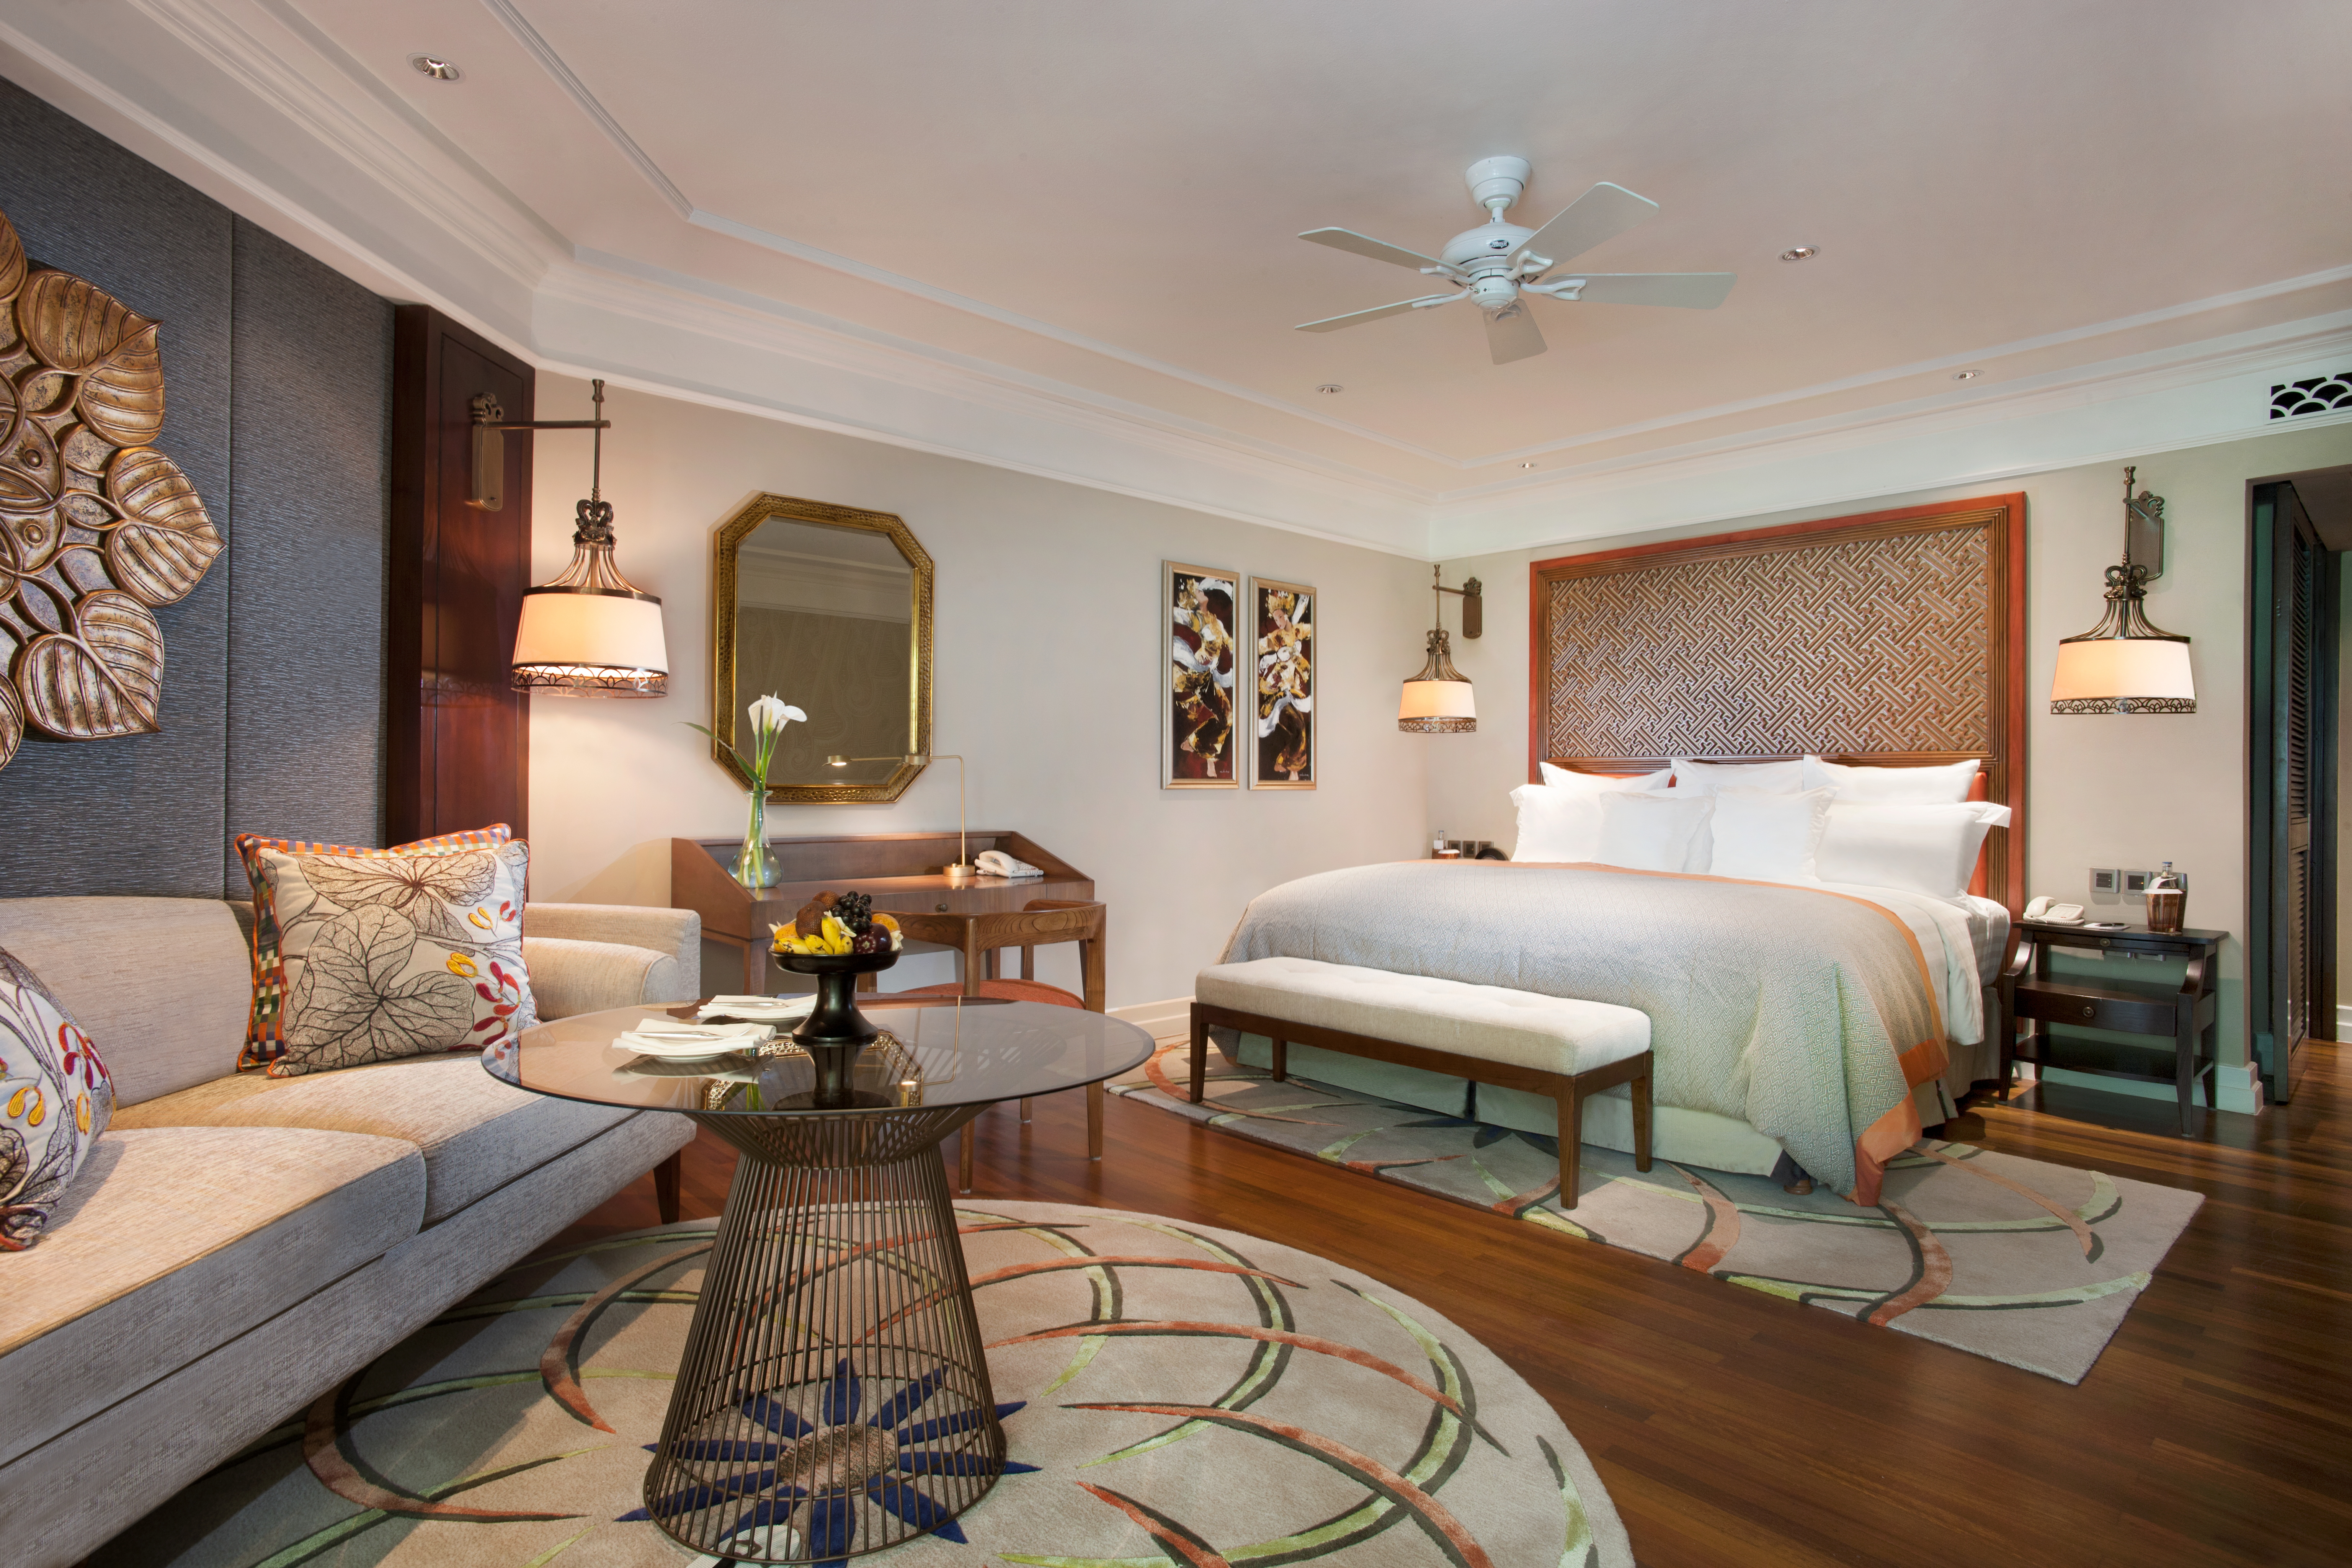 INTERCONTINENTAL BALI RESORT LAUNCHES ‘ROOMS WITH A SOUL’ WHERE TRADITION MEETS LUXURY